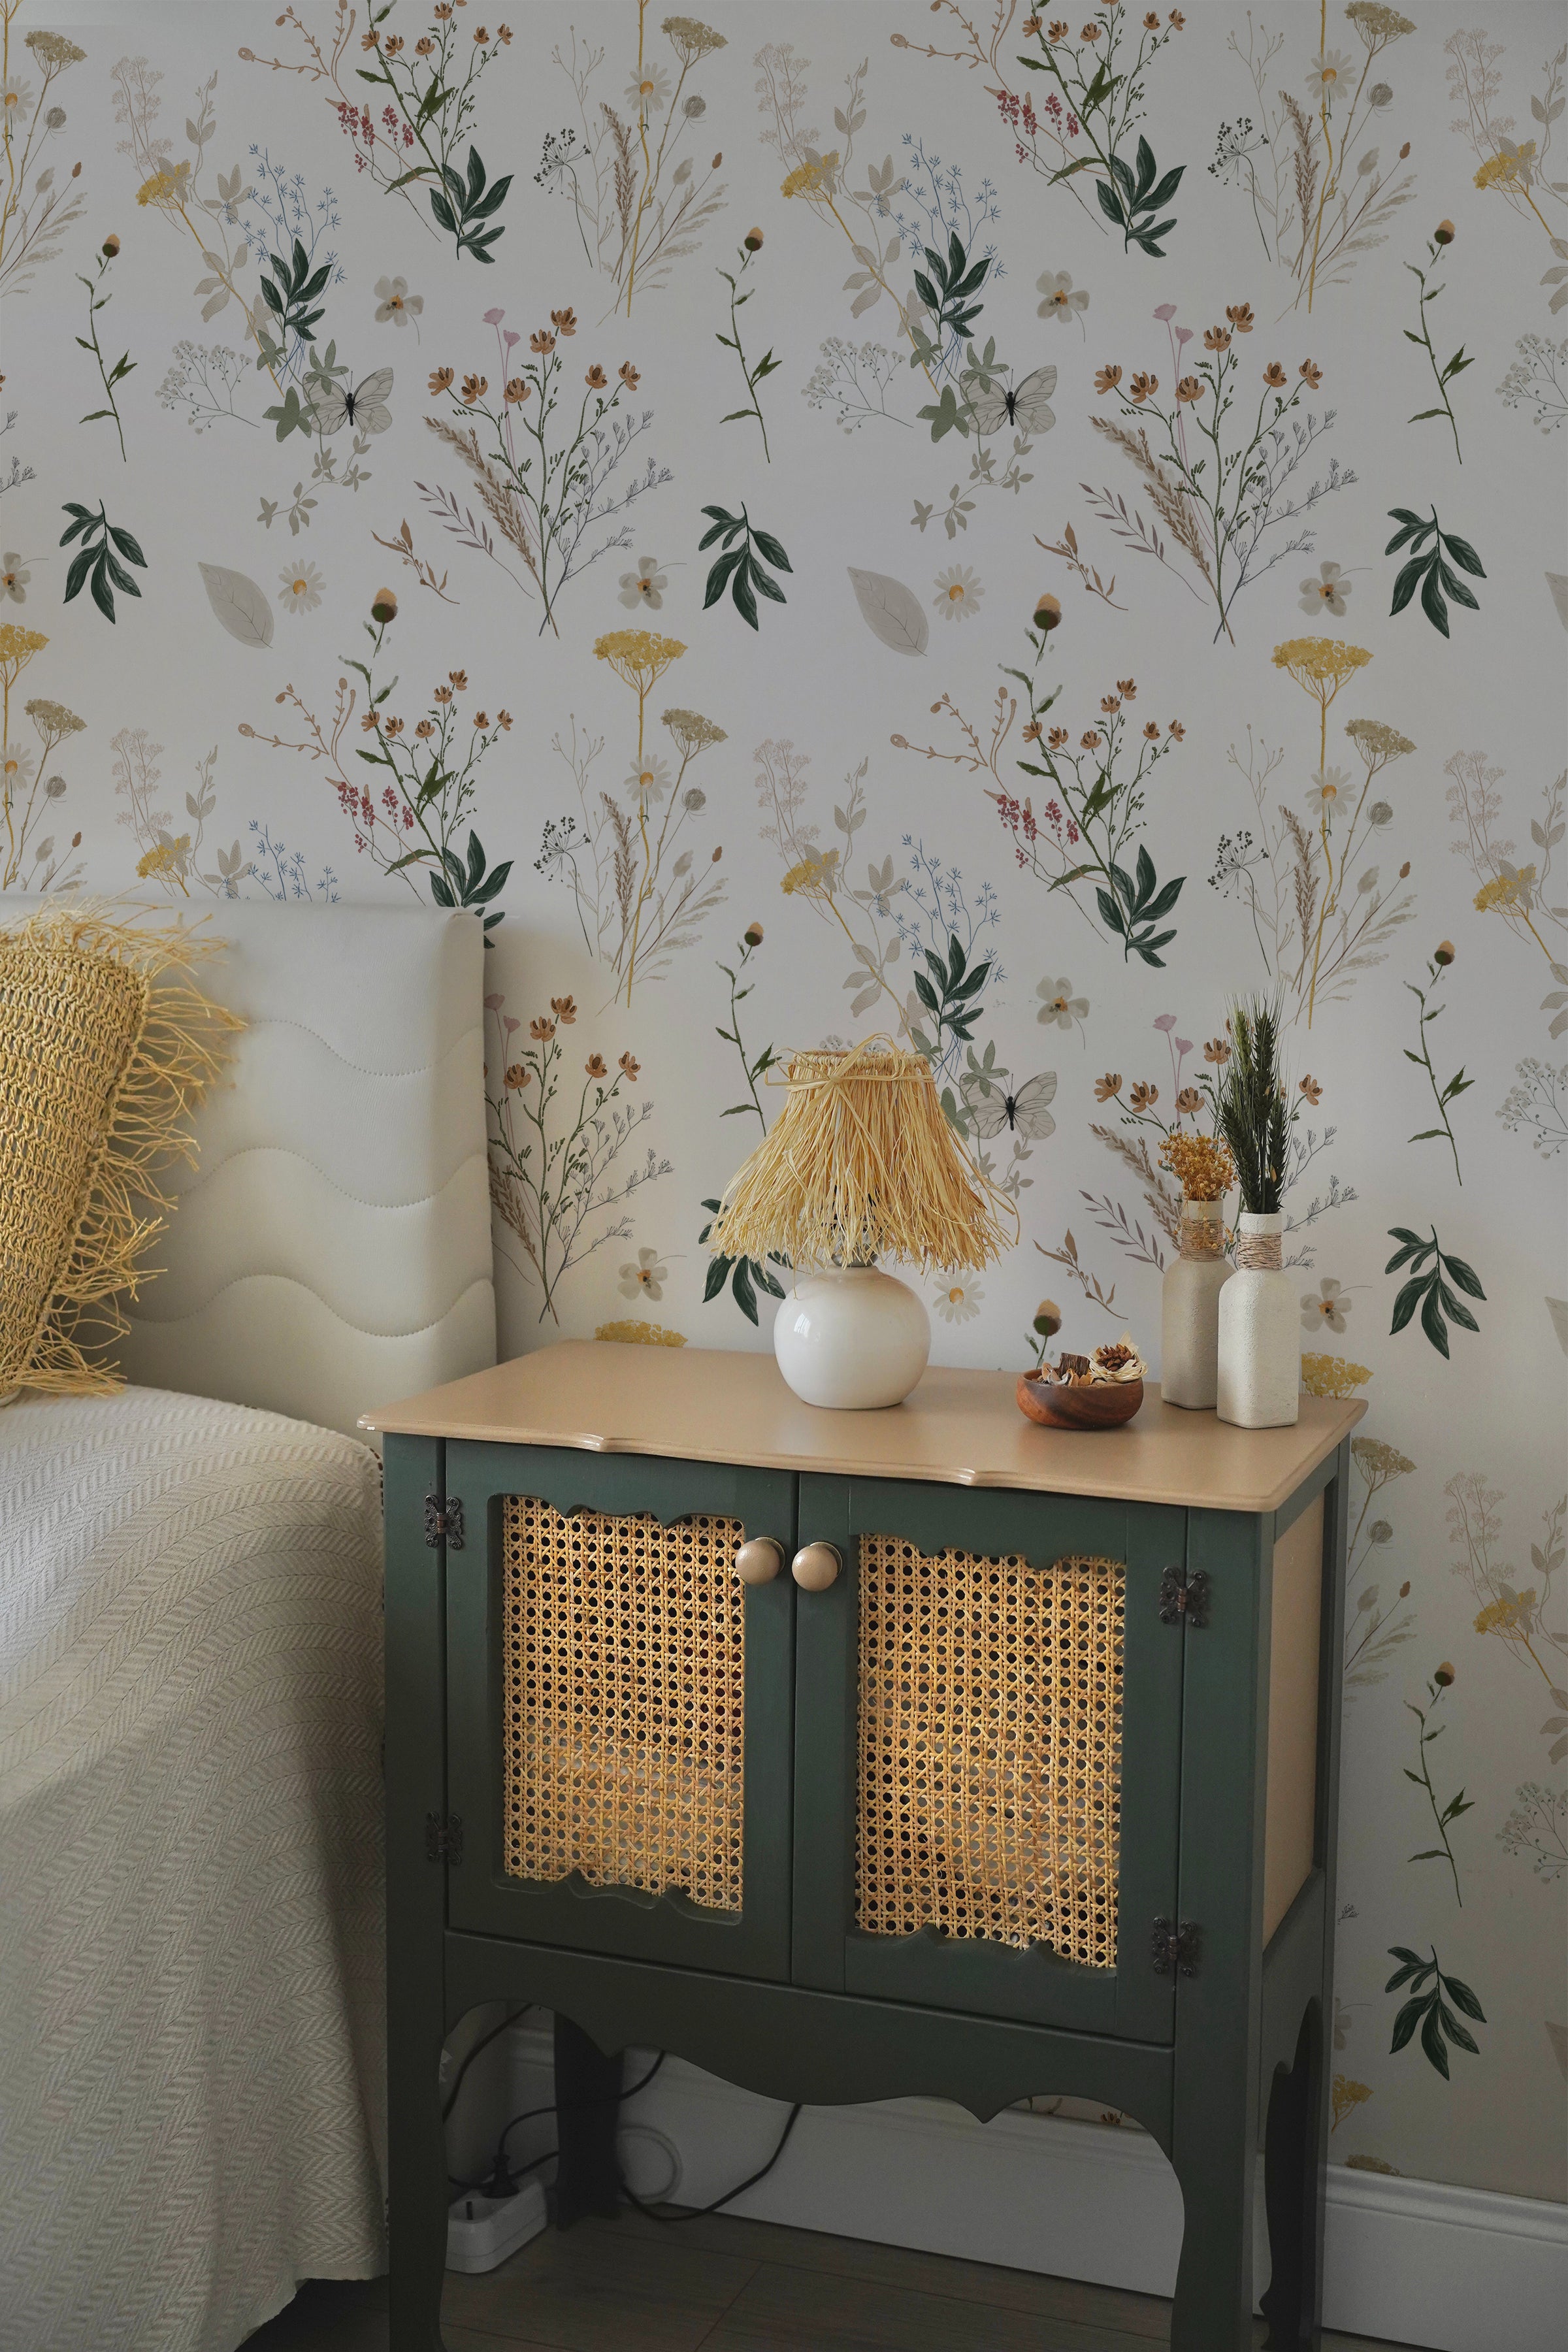 A cozy bedroom corner with a botanical wallpaper featuring a variety of wildflowers and leaves in a soft color palette. A side table painted in dark green with rattan cabinet doors is adorned with a white vase with straw fringes, a small wooden bowl, and textured vases with dried botanicals.